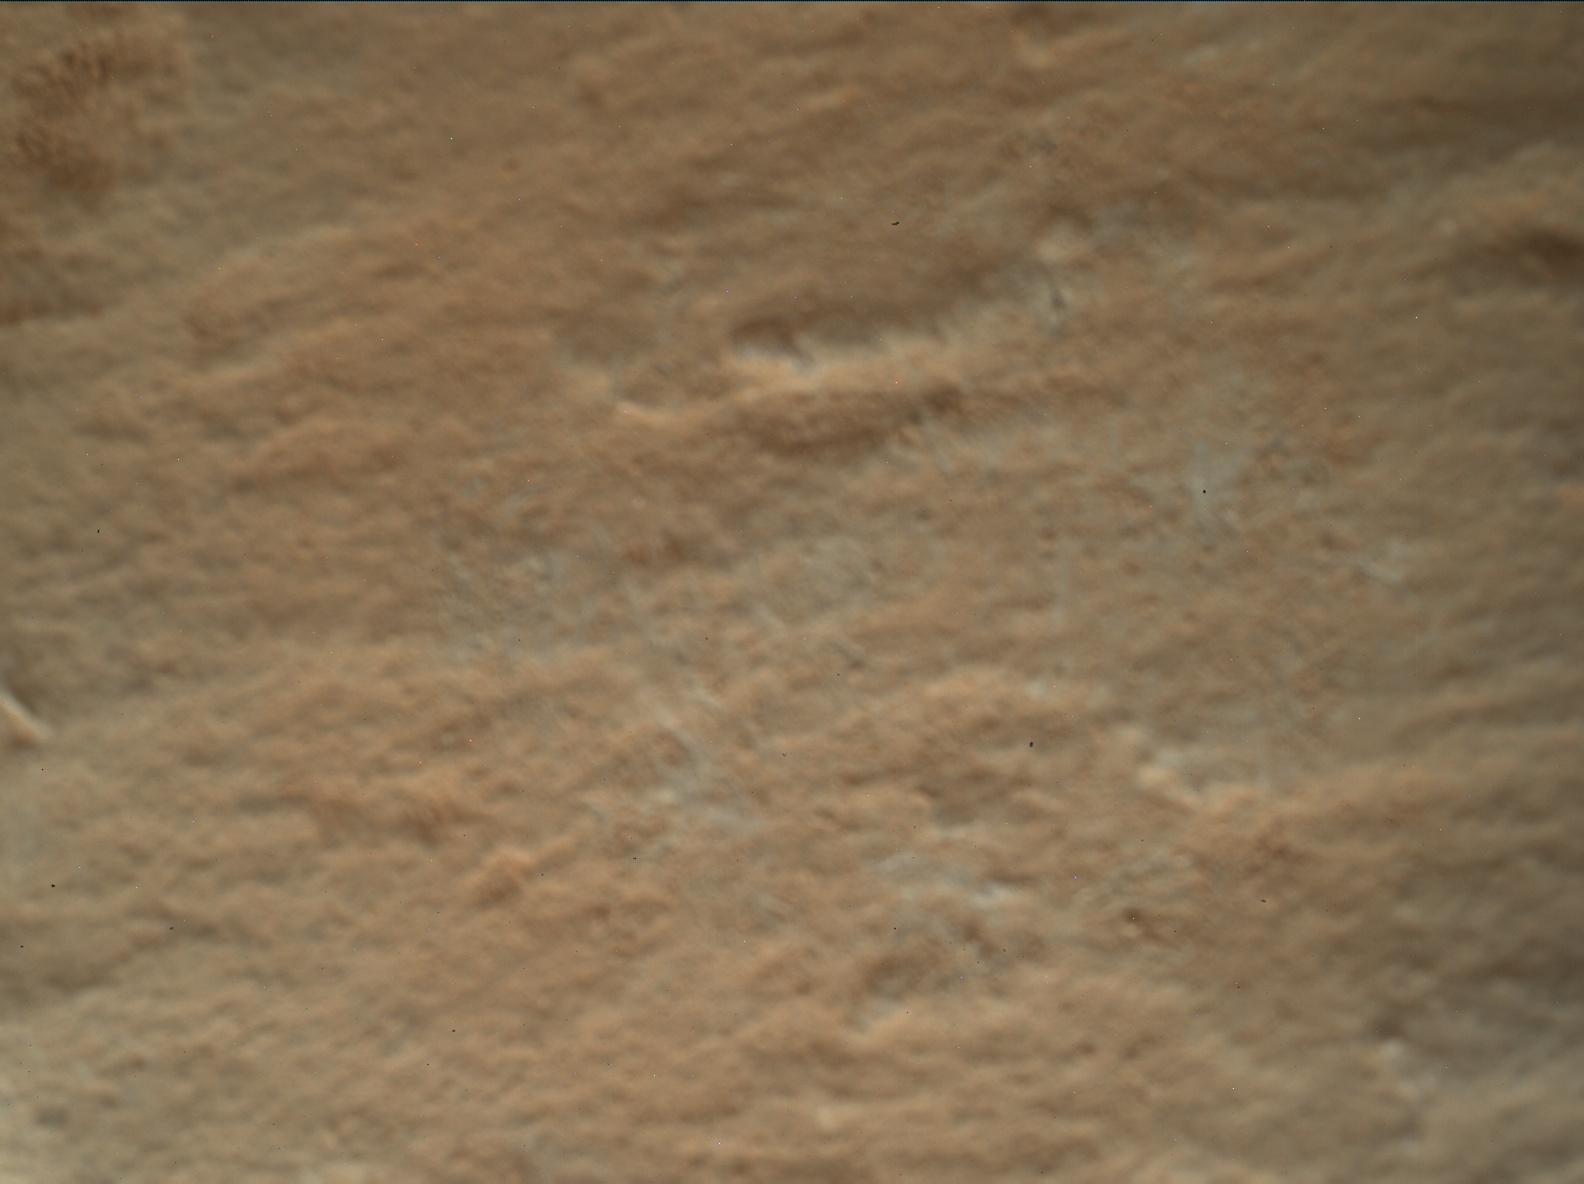 Nasa's Mars rover Curiosity acquired this image using its Mars Hand Lens Imager (MAHLI) on Sol 2662